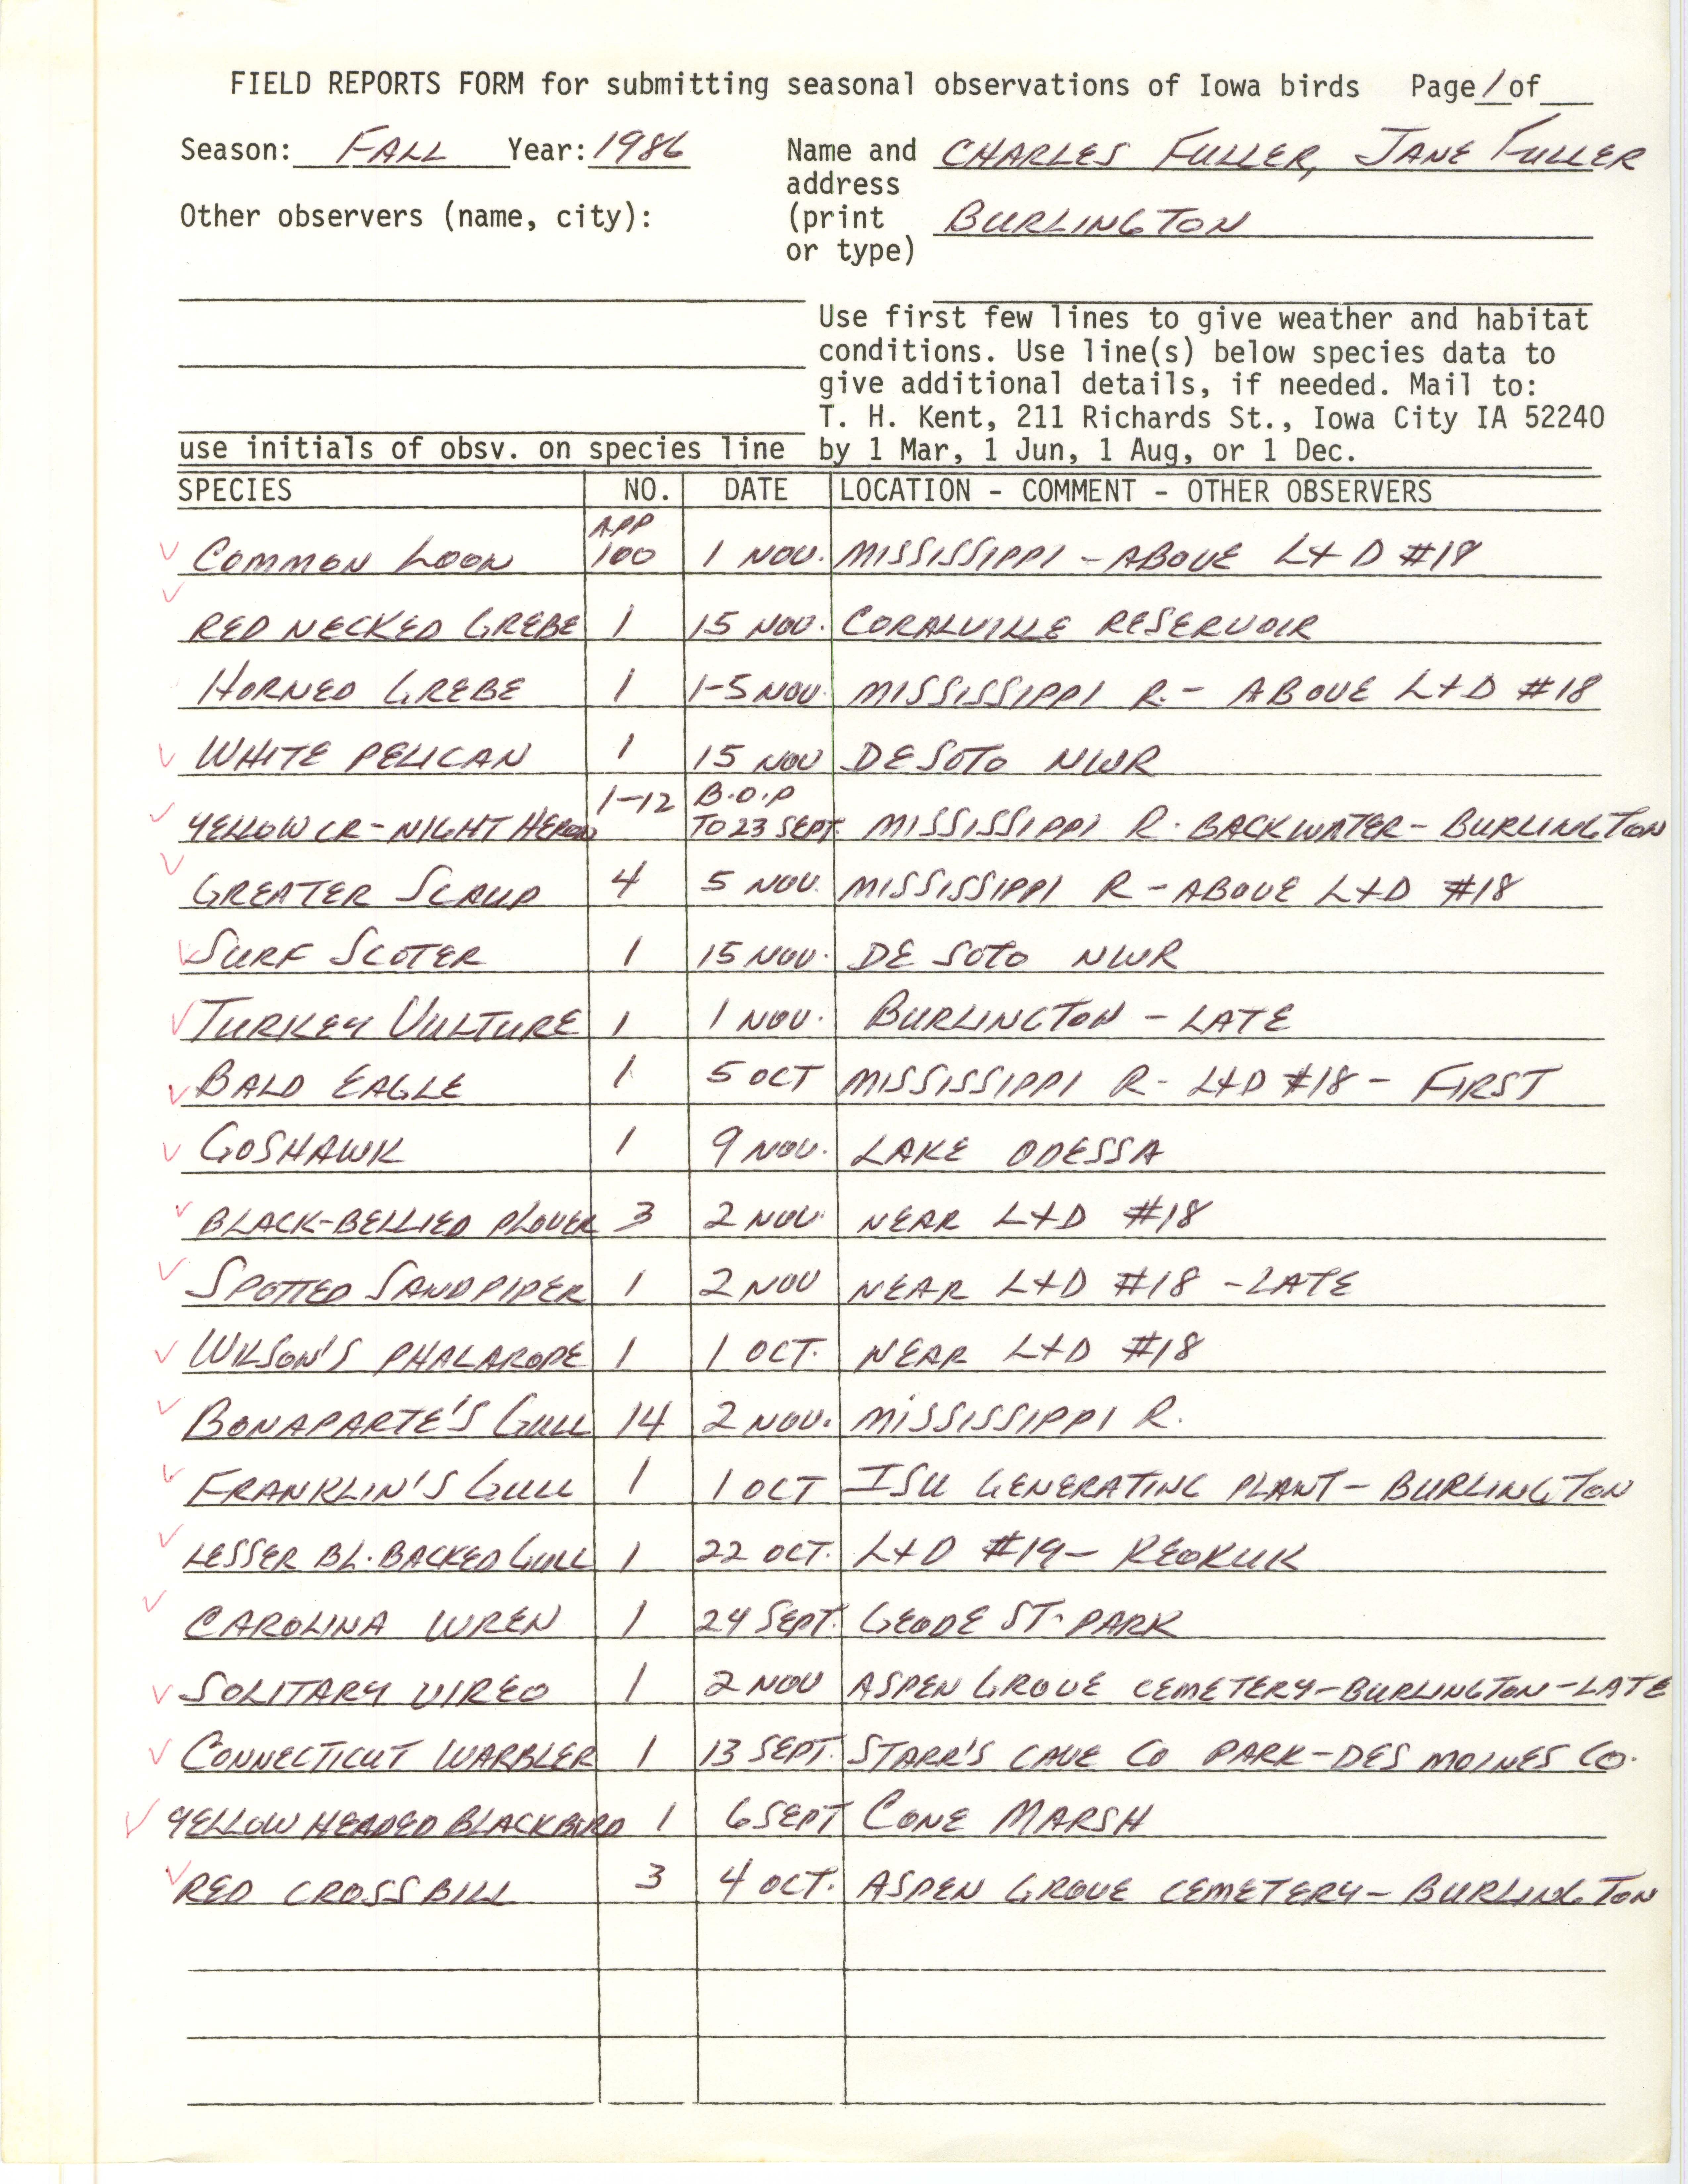 Field reports form, contributed by Charles Fuller, fall 1986